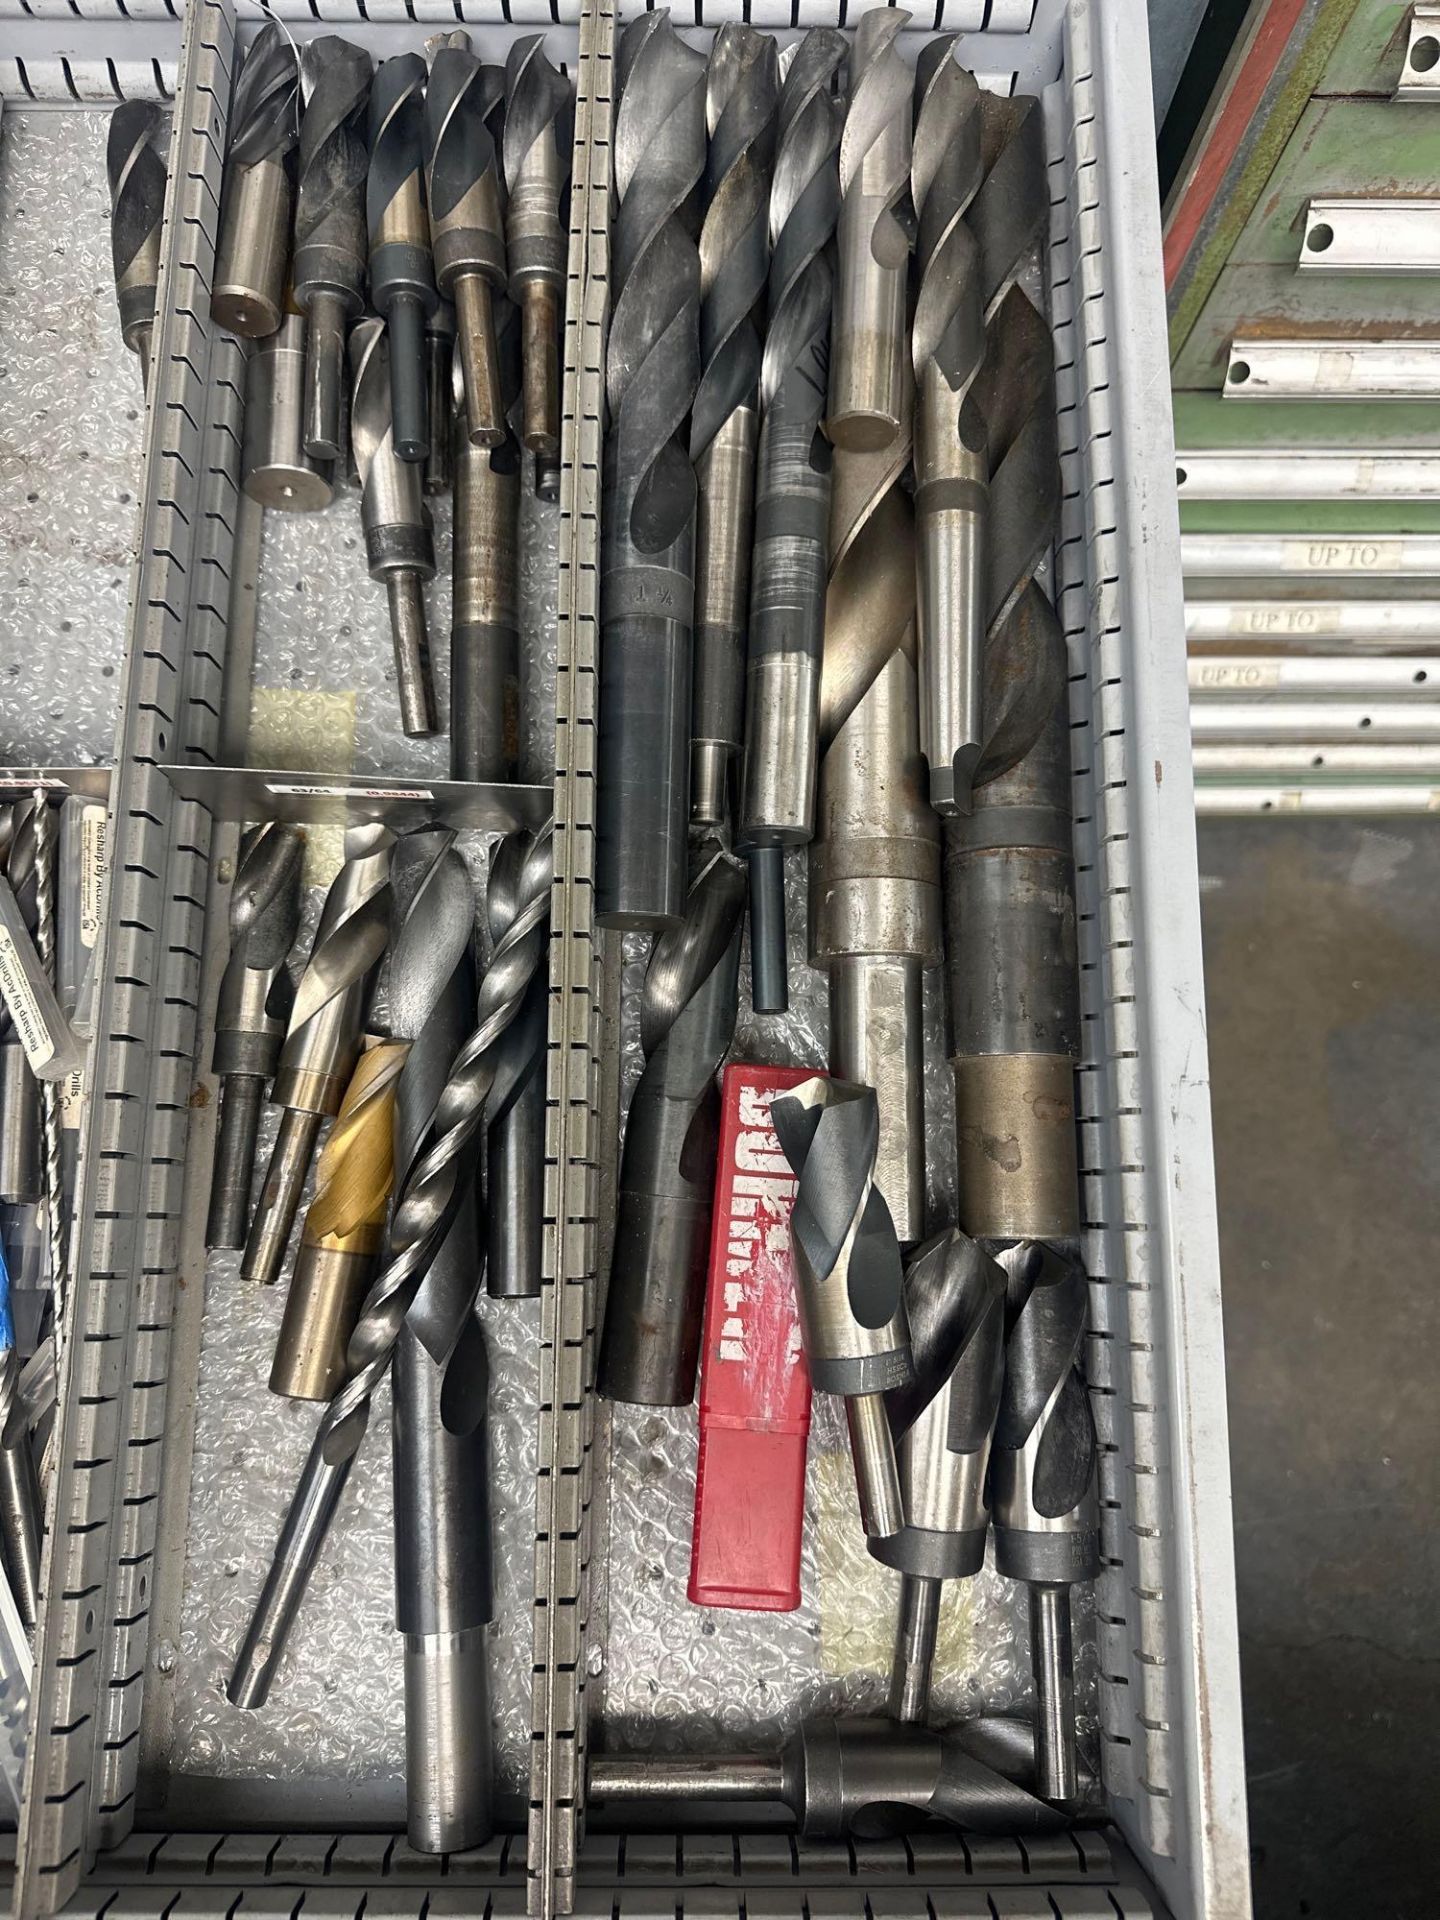 Drawer with Assorted Drills - Image 6 of 6